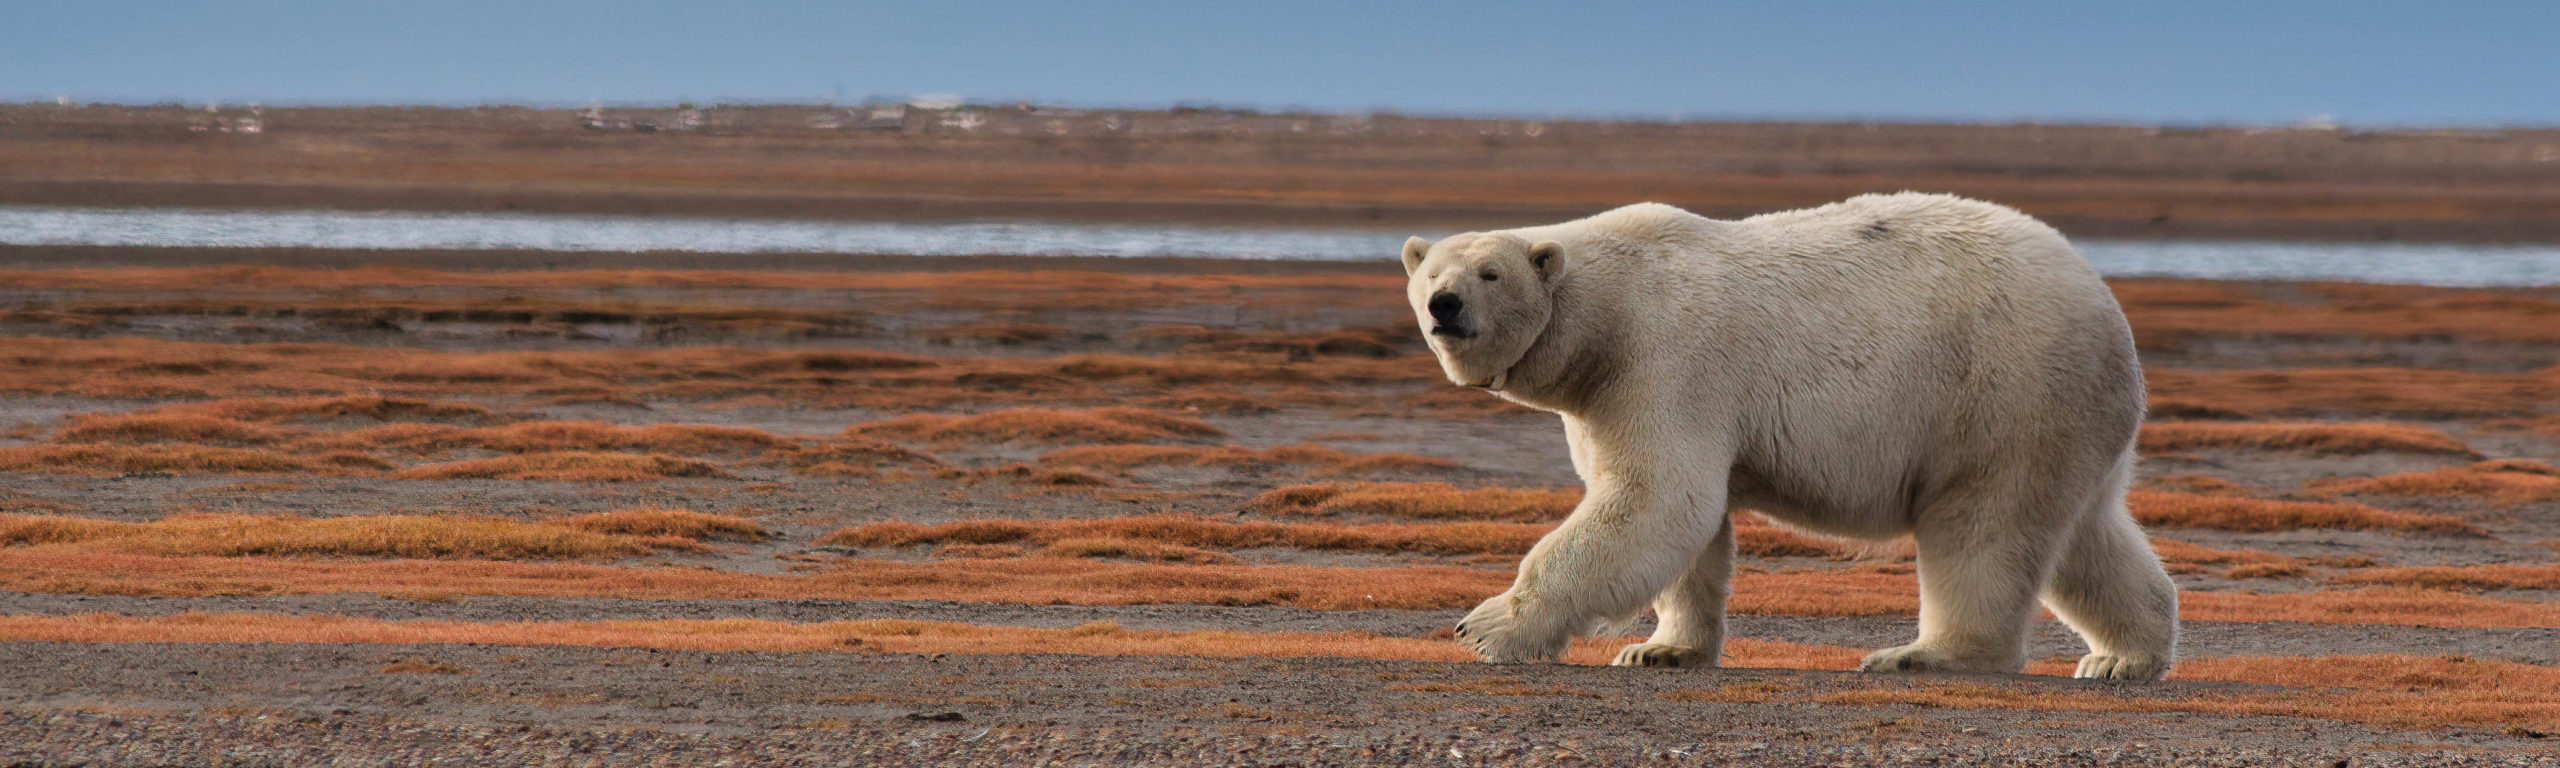 Changes to prey distribution due to climate shifts show in polar bear diet  – YFile